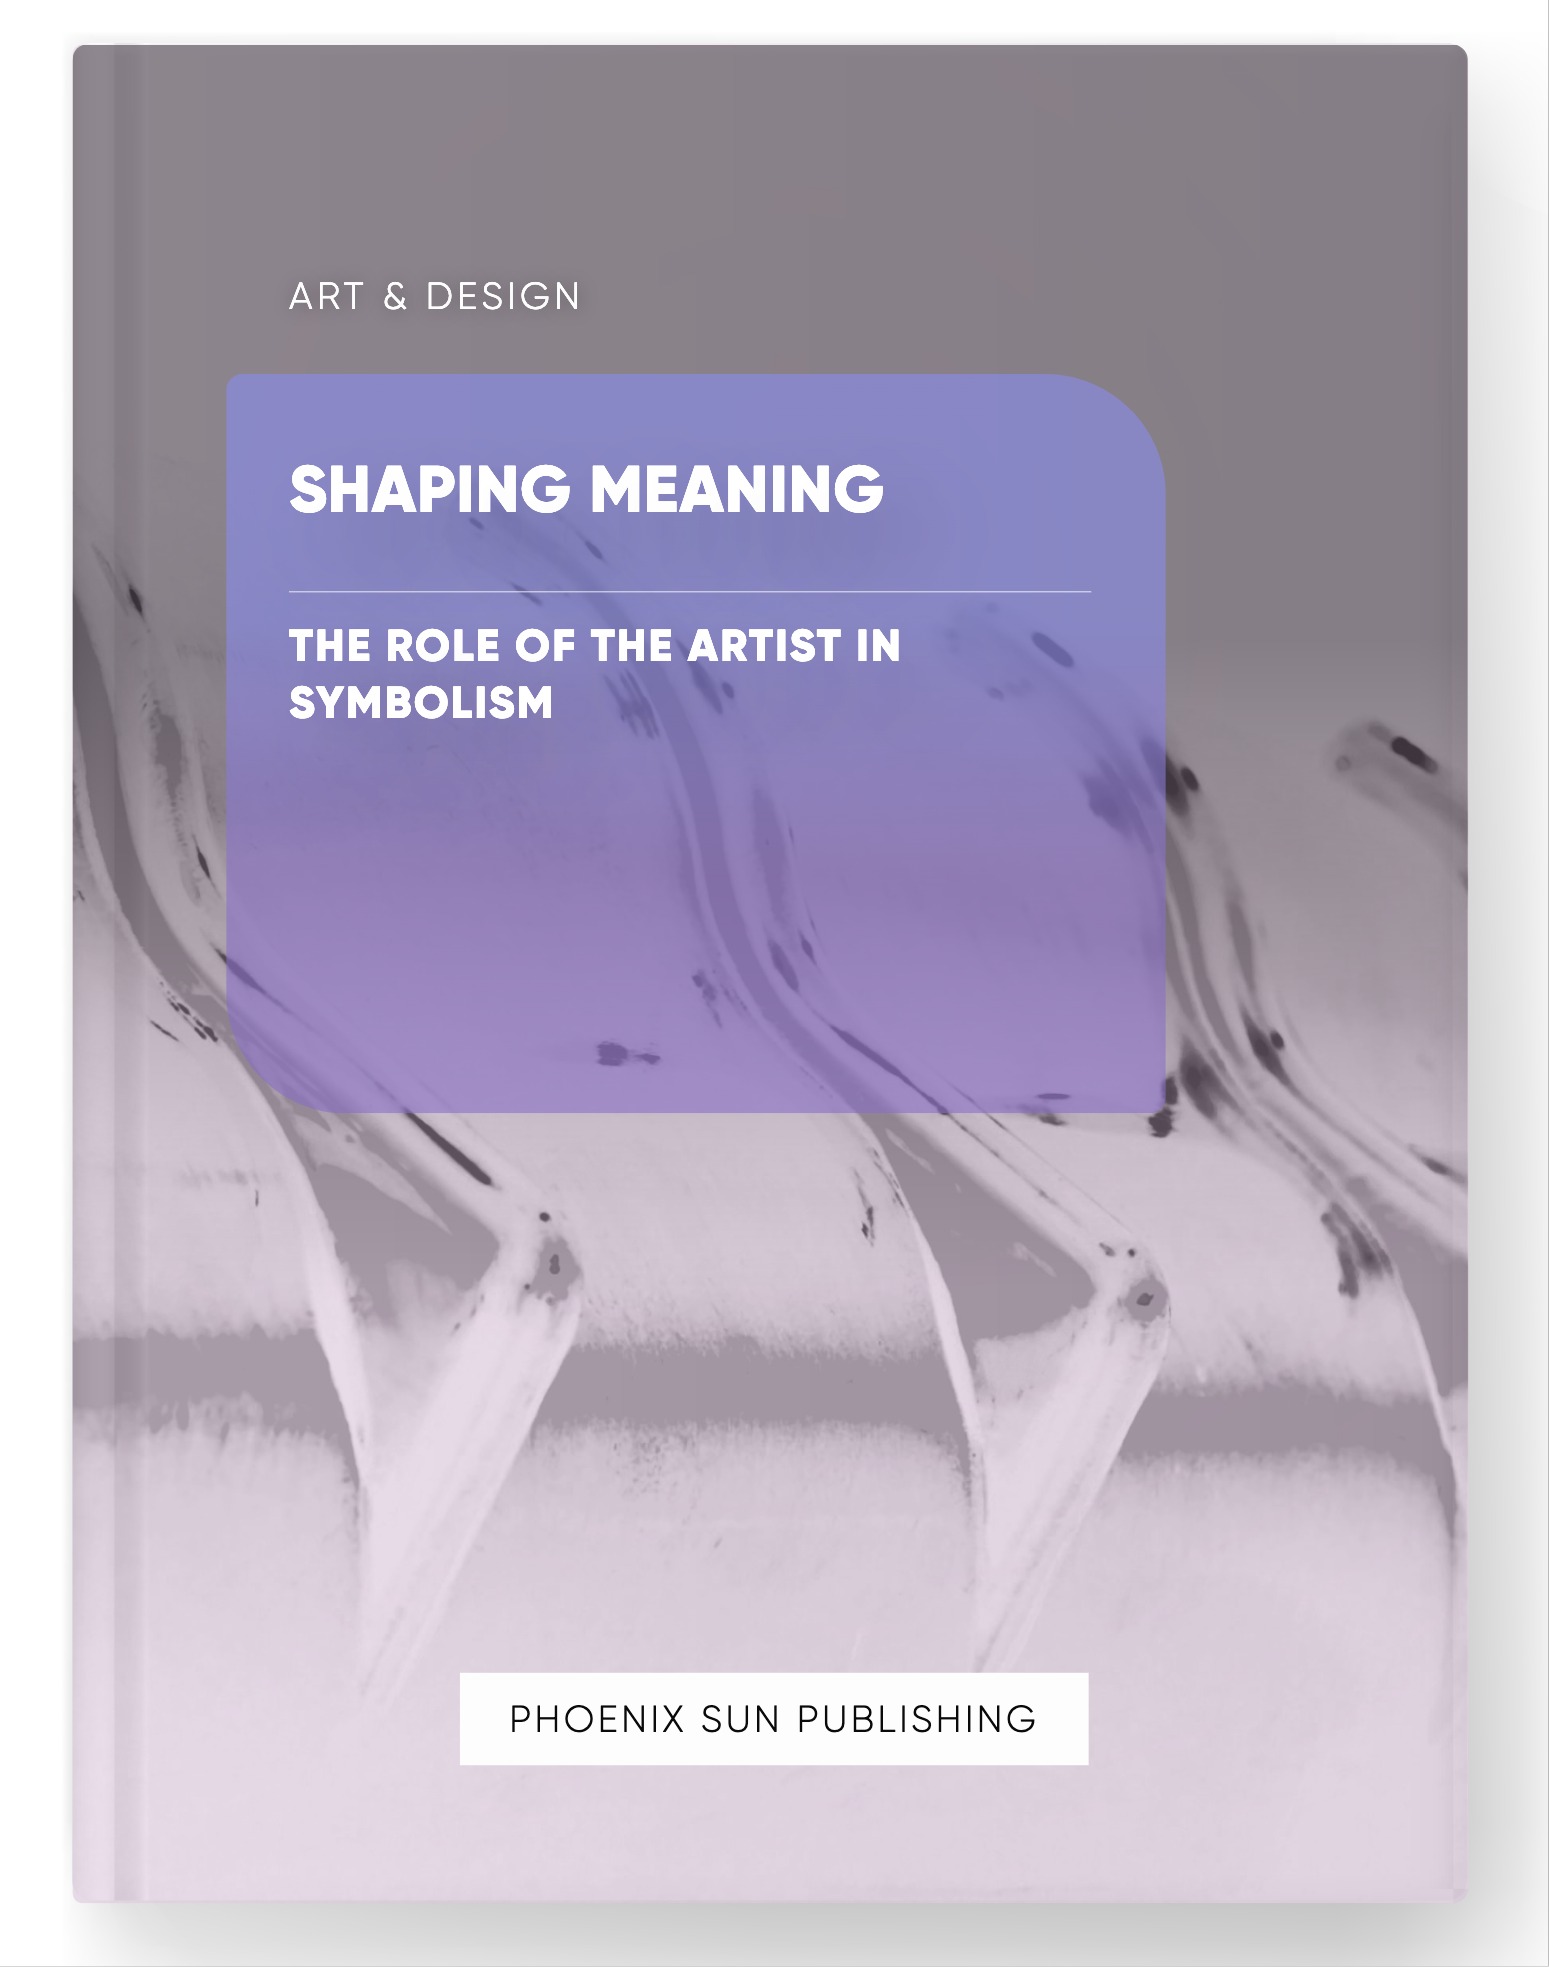 Shaping Meaning – The Role of the Artist in Symbolism